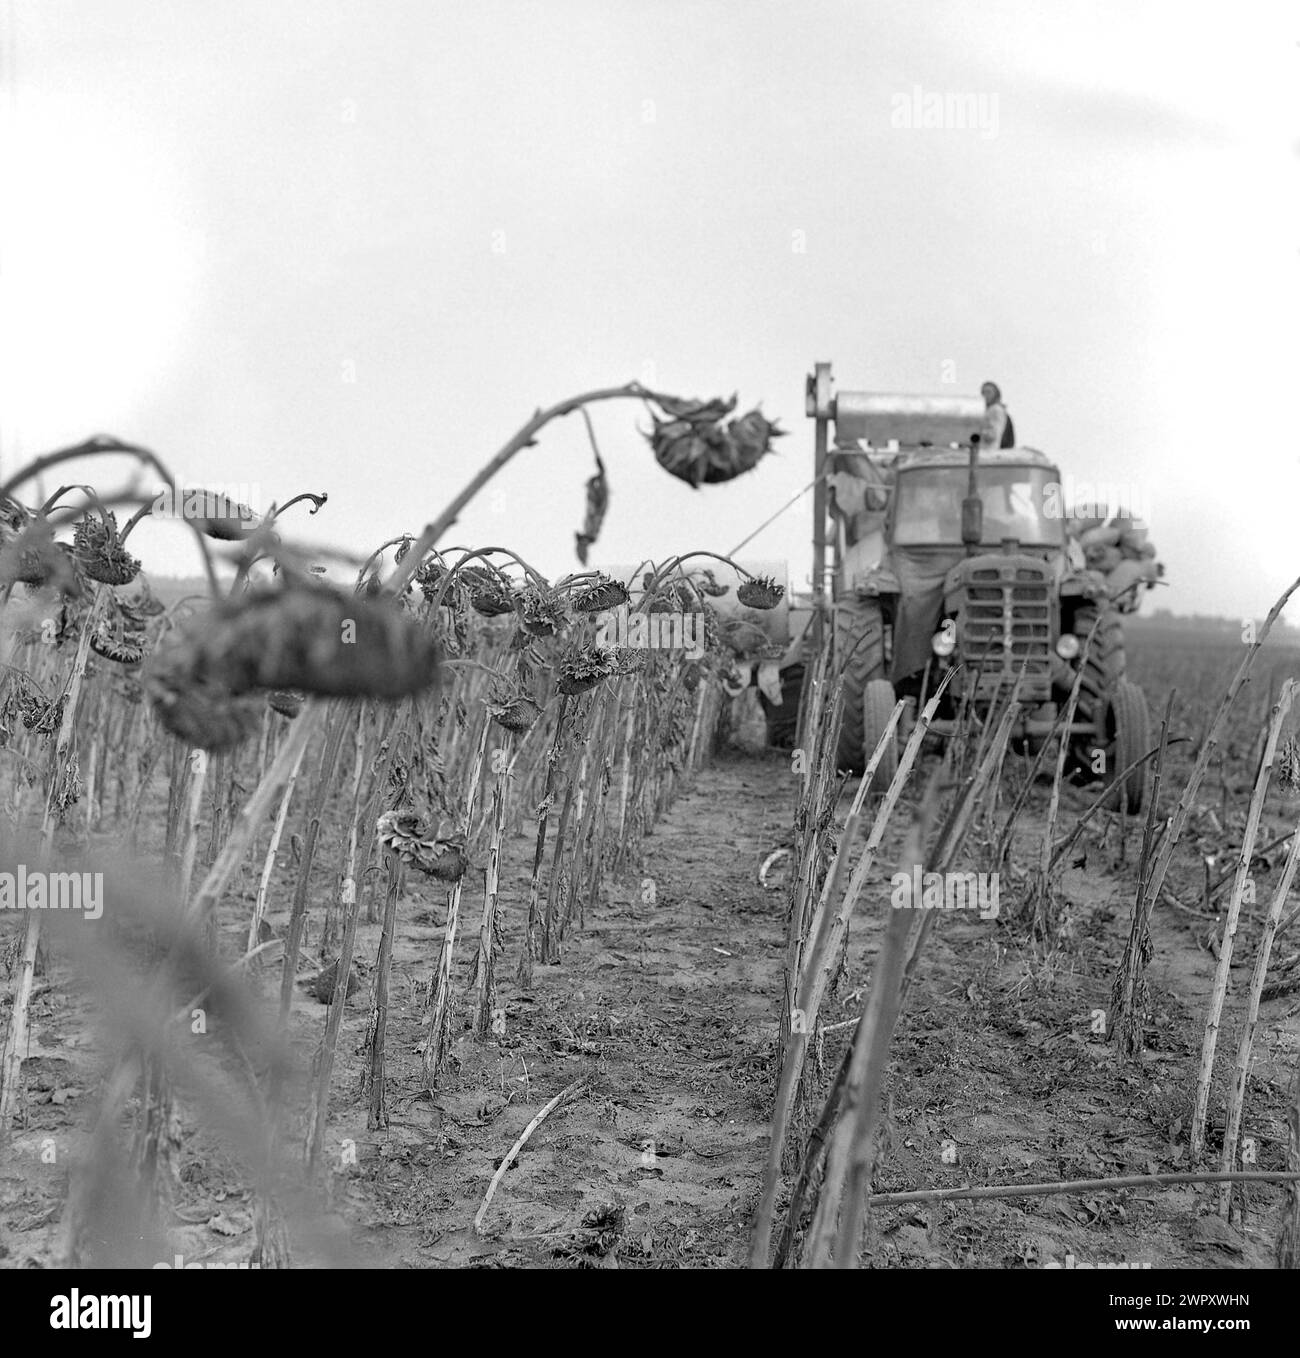 Harvesting sunflowers at a State Agricultural Cooperative (C.A.P.) in communist Romania, in the 1970s. Stock Photo